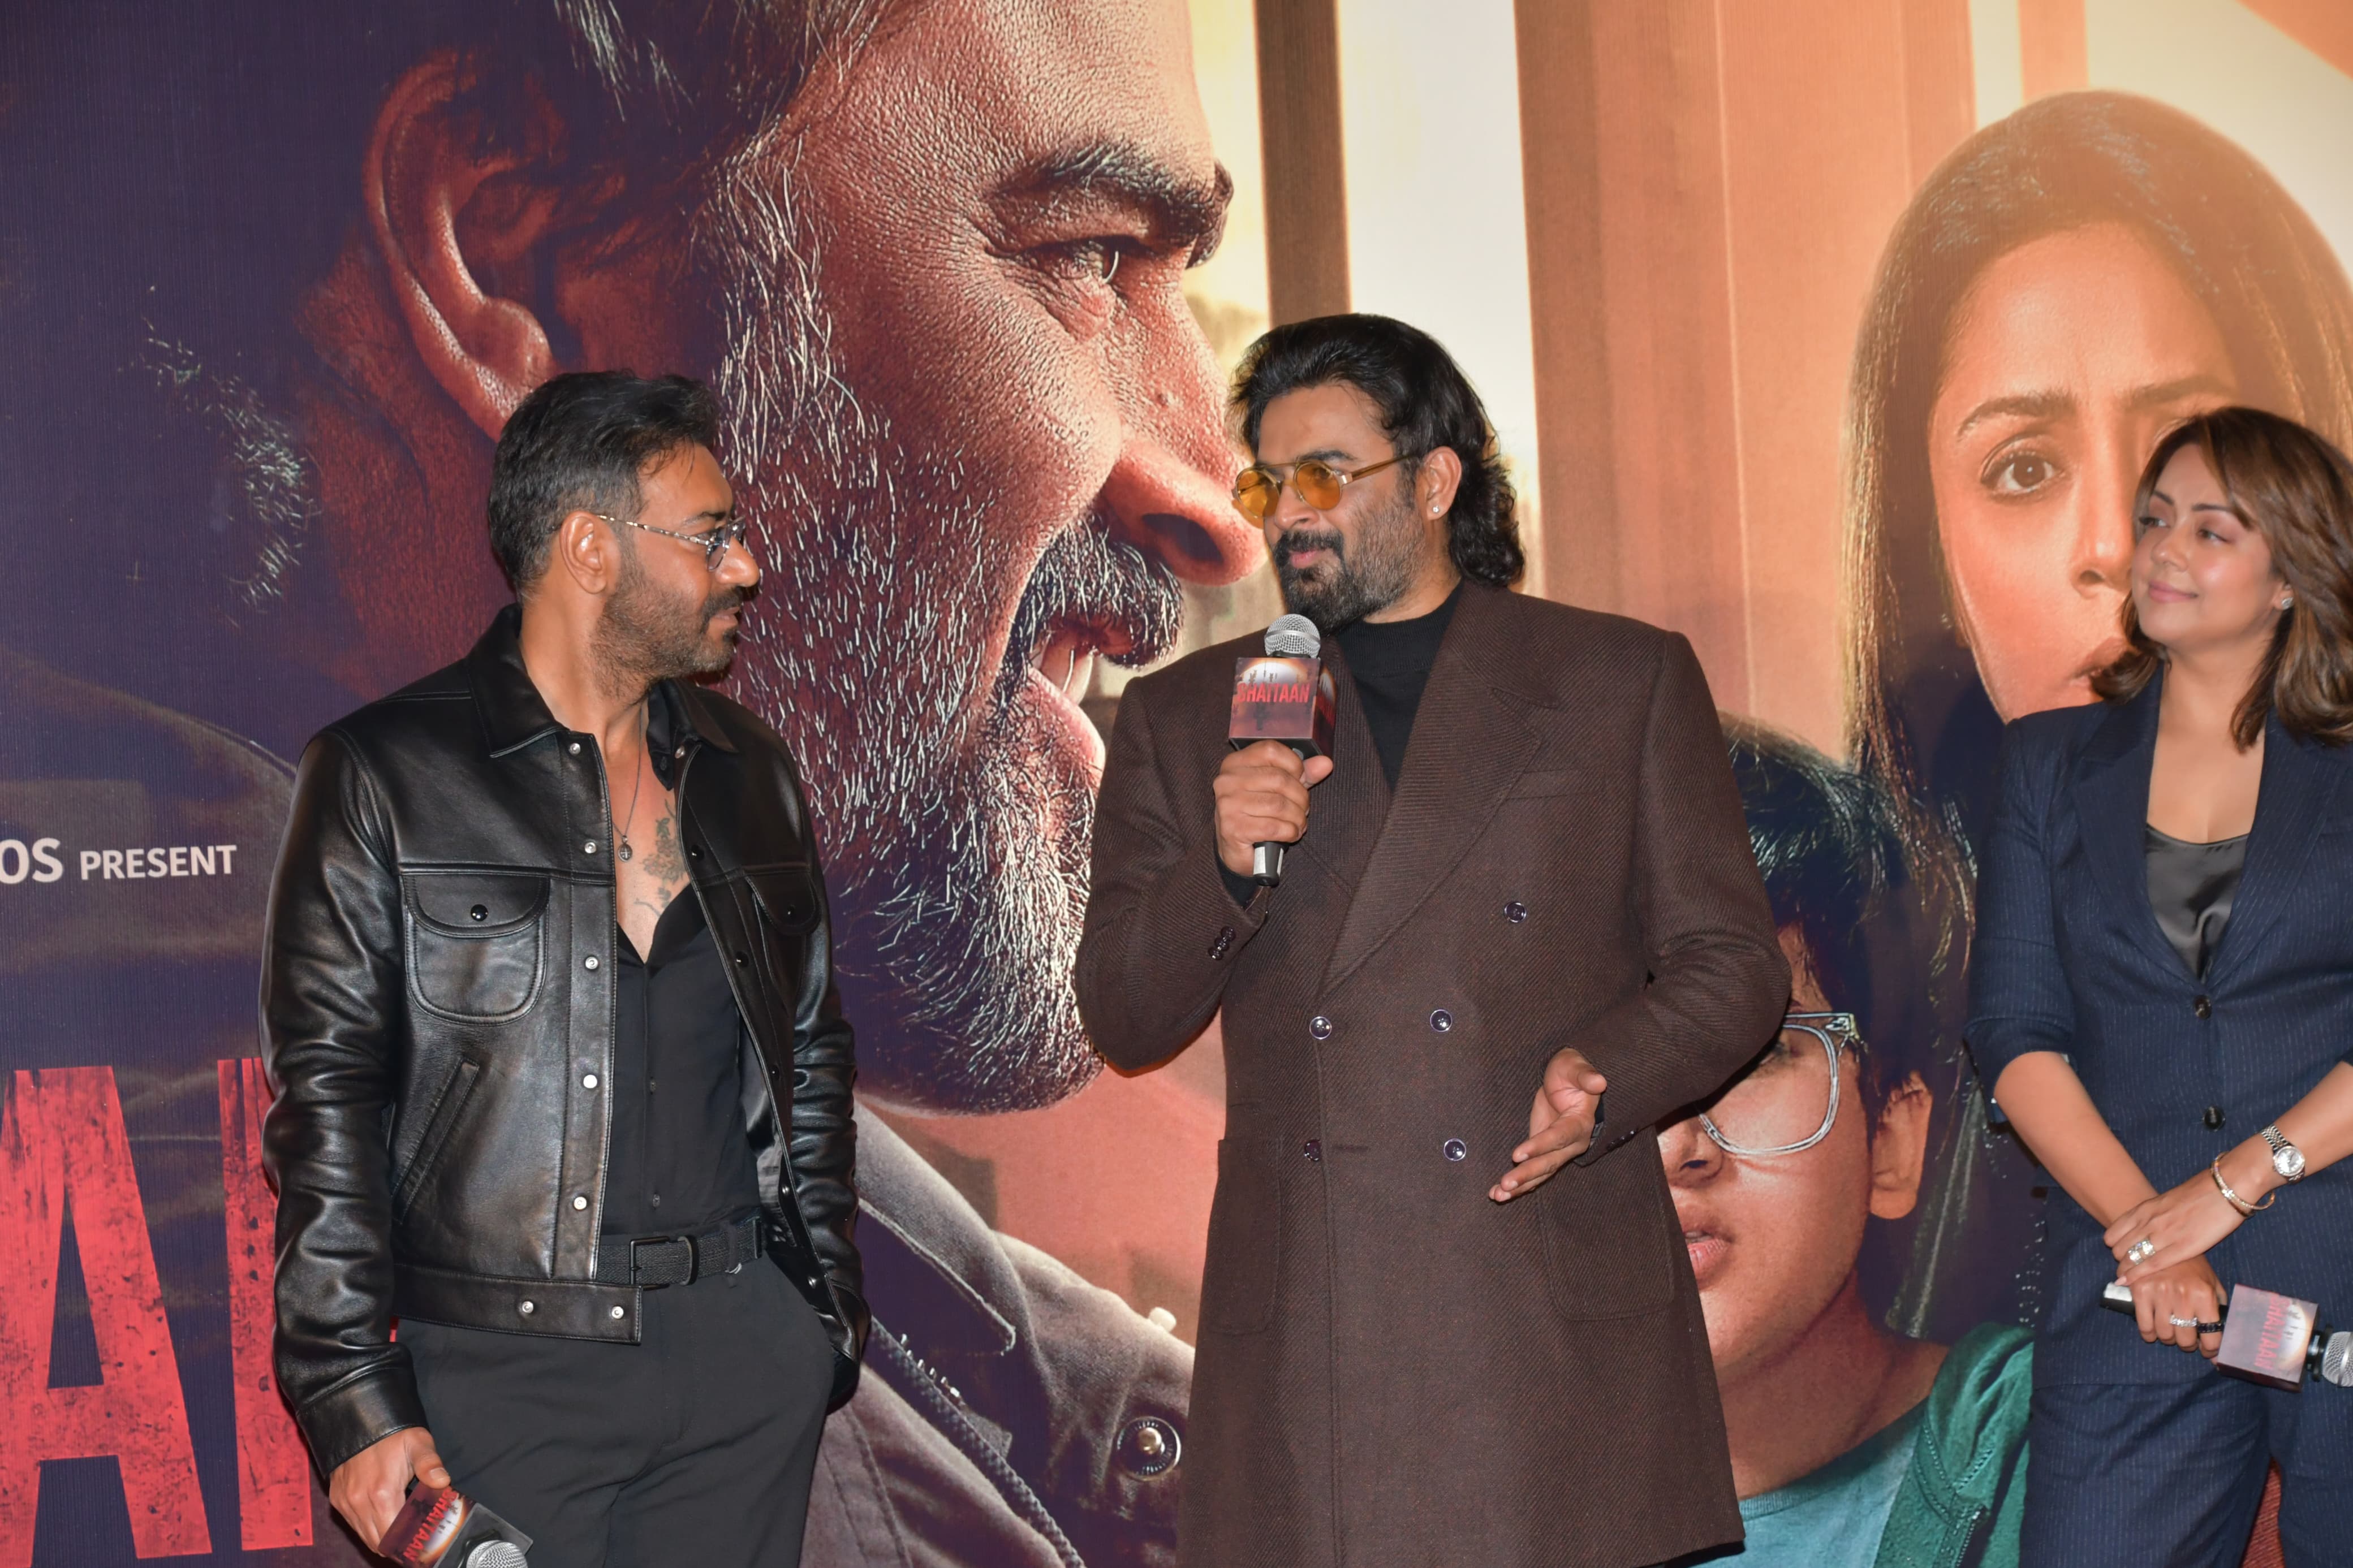 The makers of ‘Shaitaan’ launched its menacing trailer on Thursday in the presence of its cast members Ajay Devgn, R Madhavan, and Jyothika.